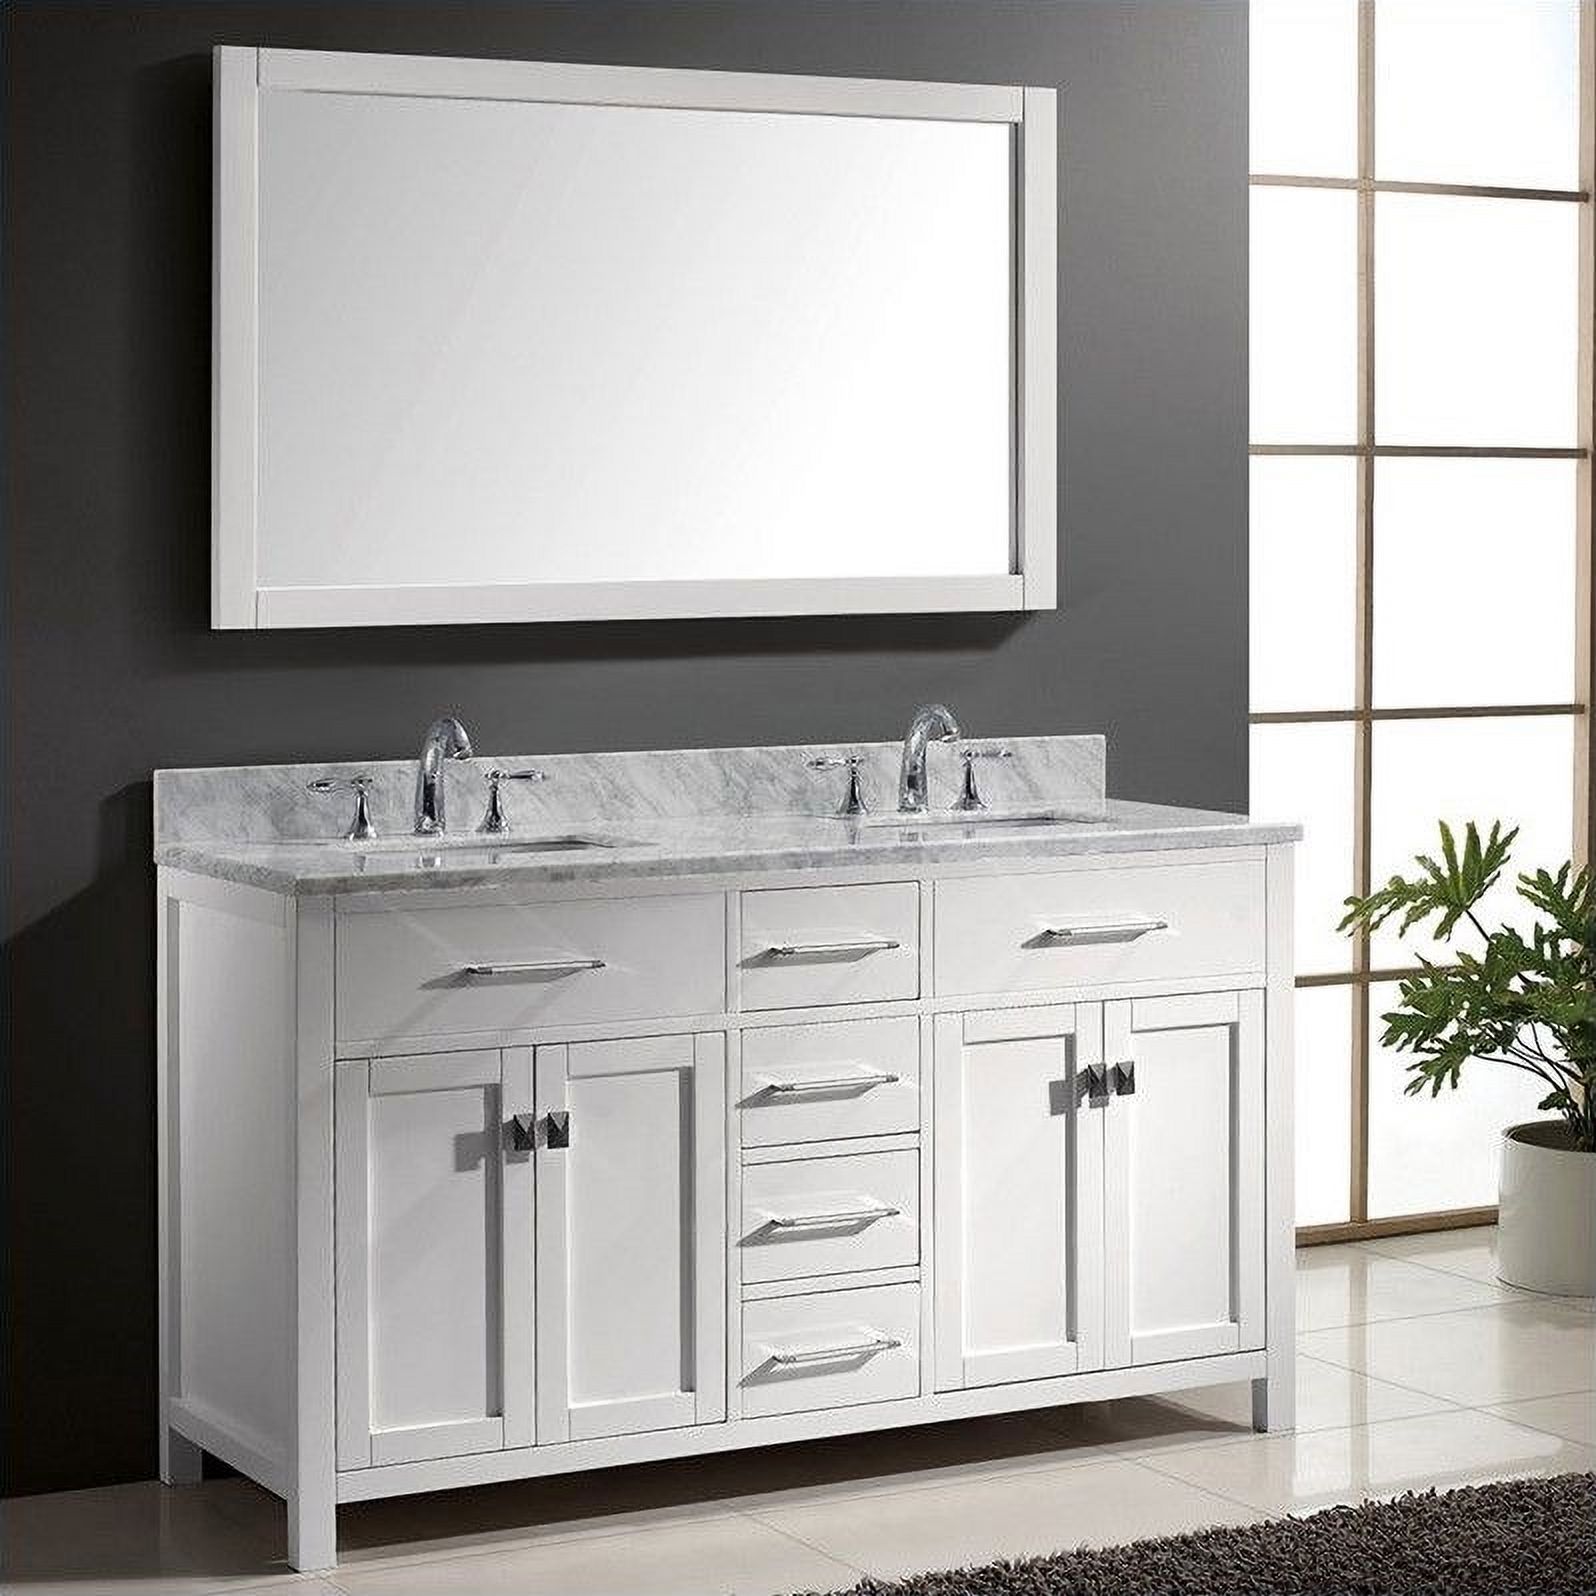 Caroline 60" Double Bath Vanity in White with White Marble Top and Square Sinks with Matching Mirror - image 2 of 4